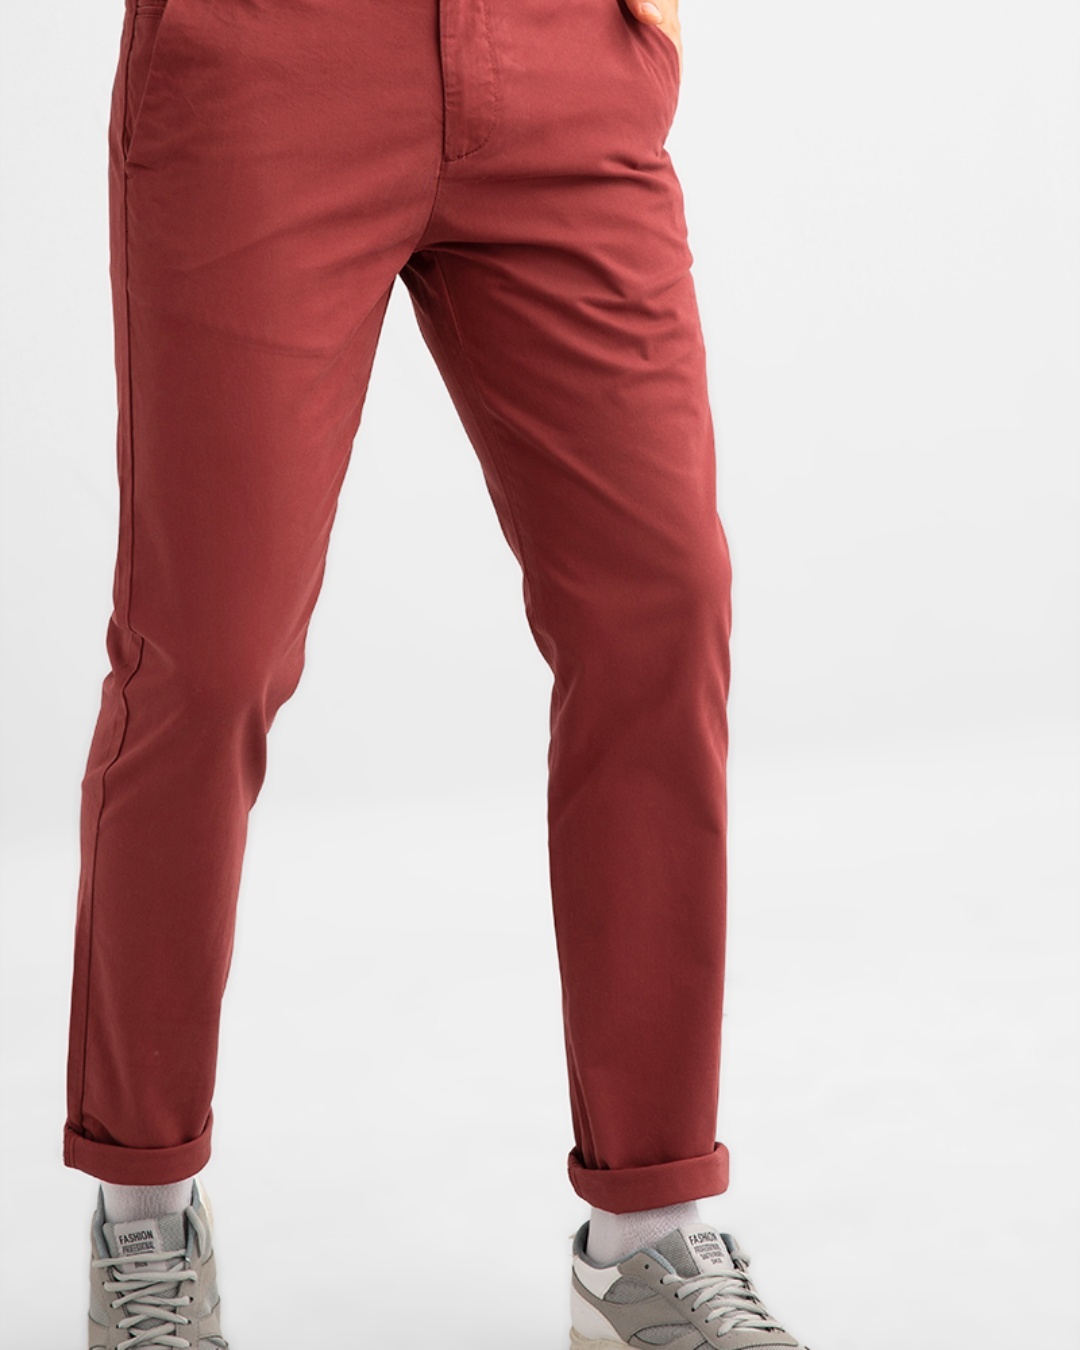 Red Chinos  Buy Red Chinos online in India